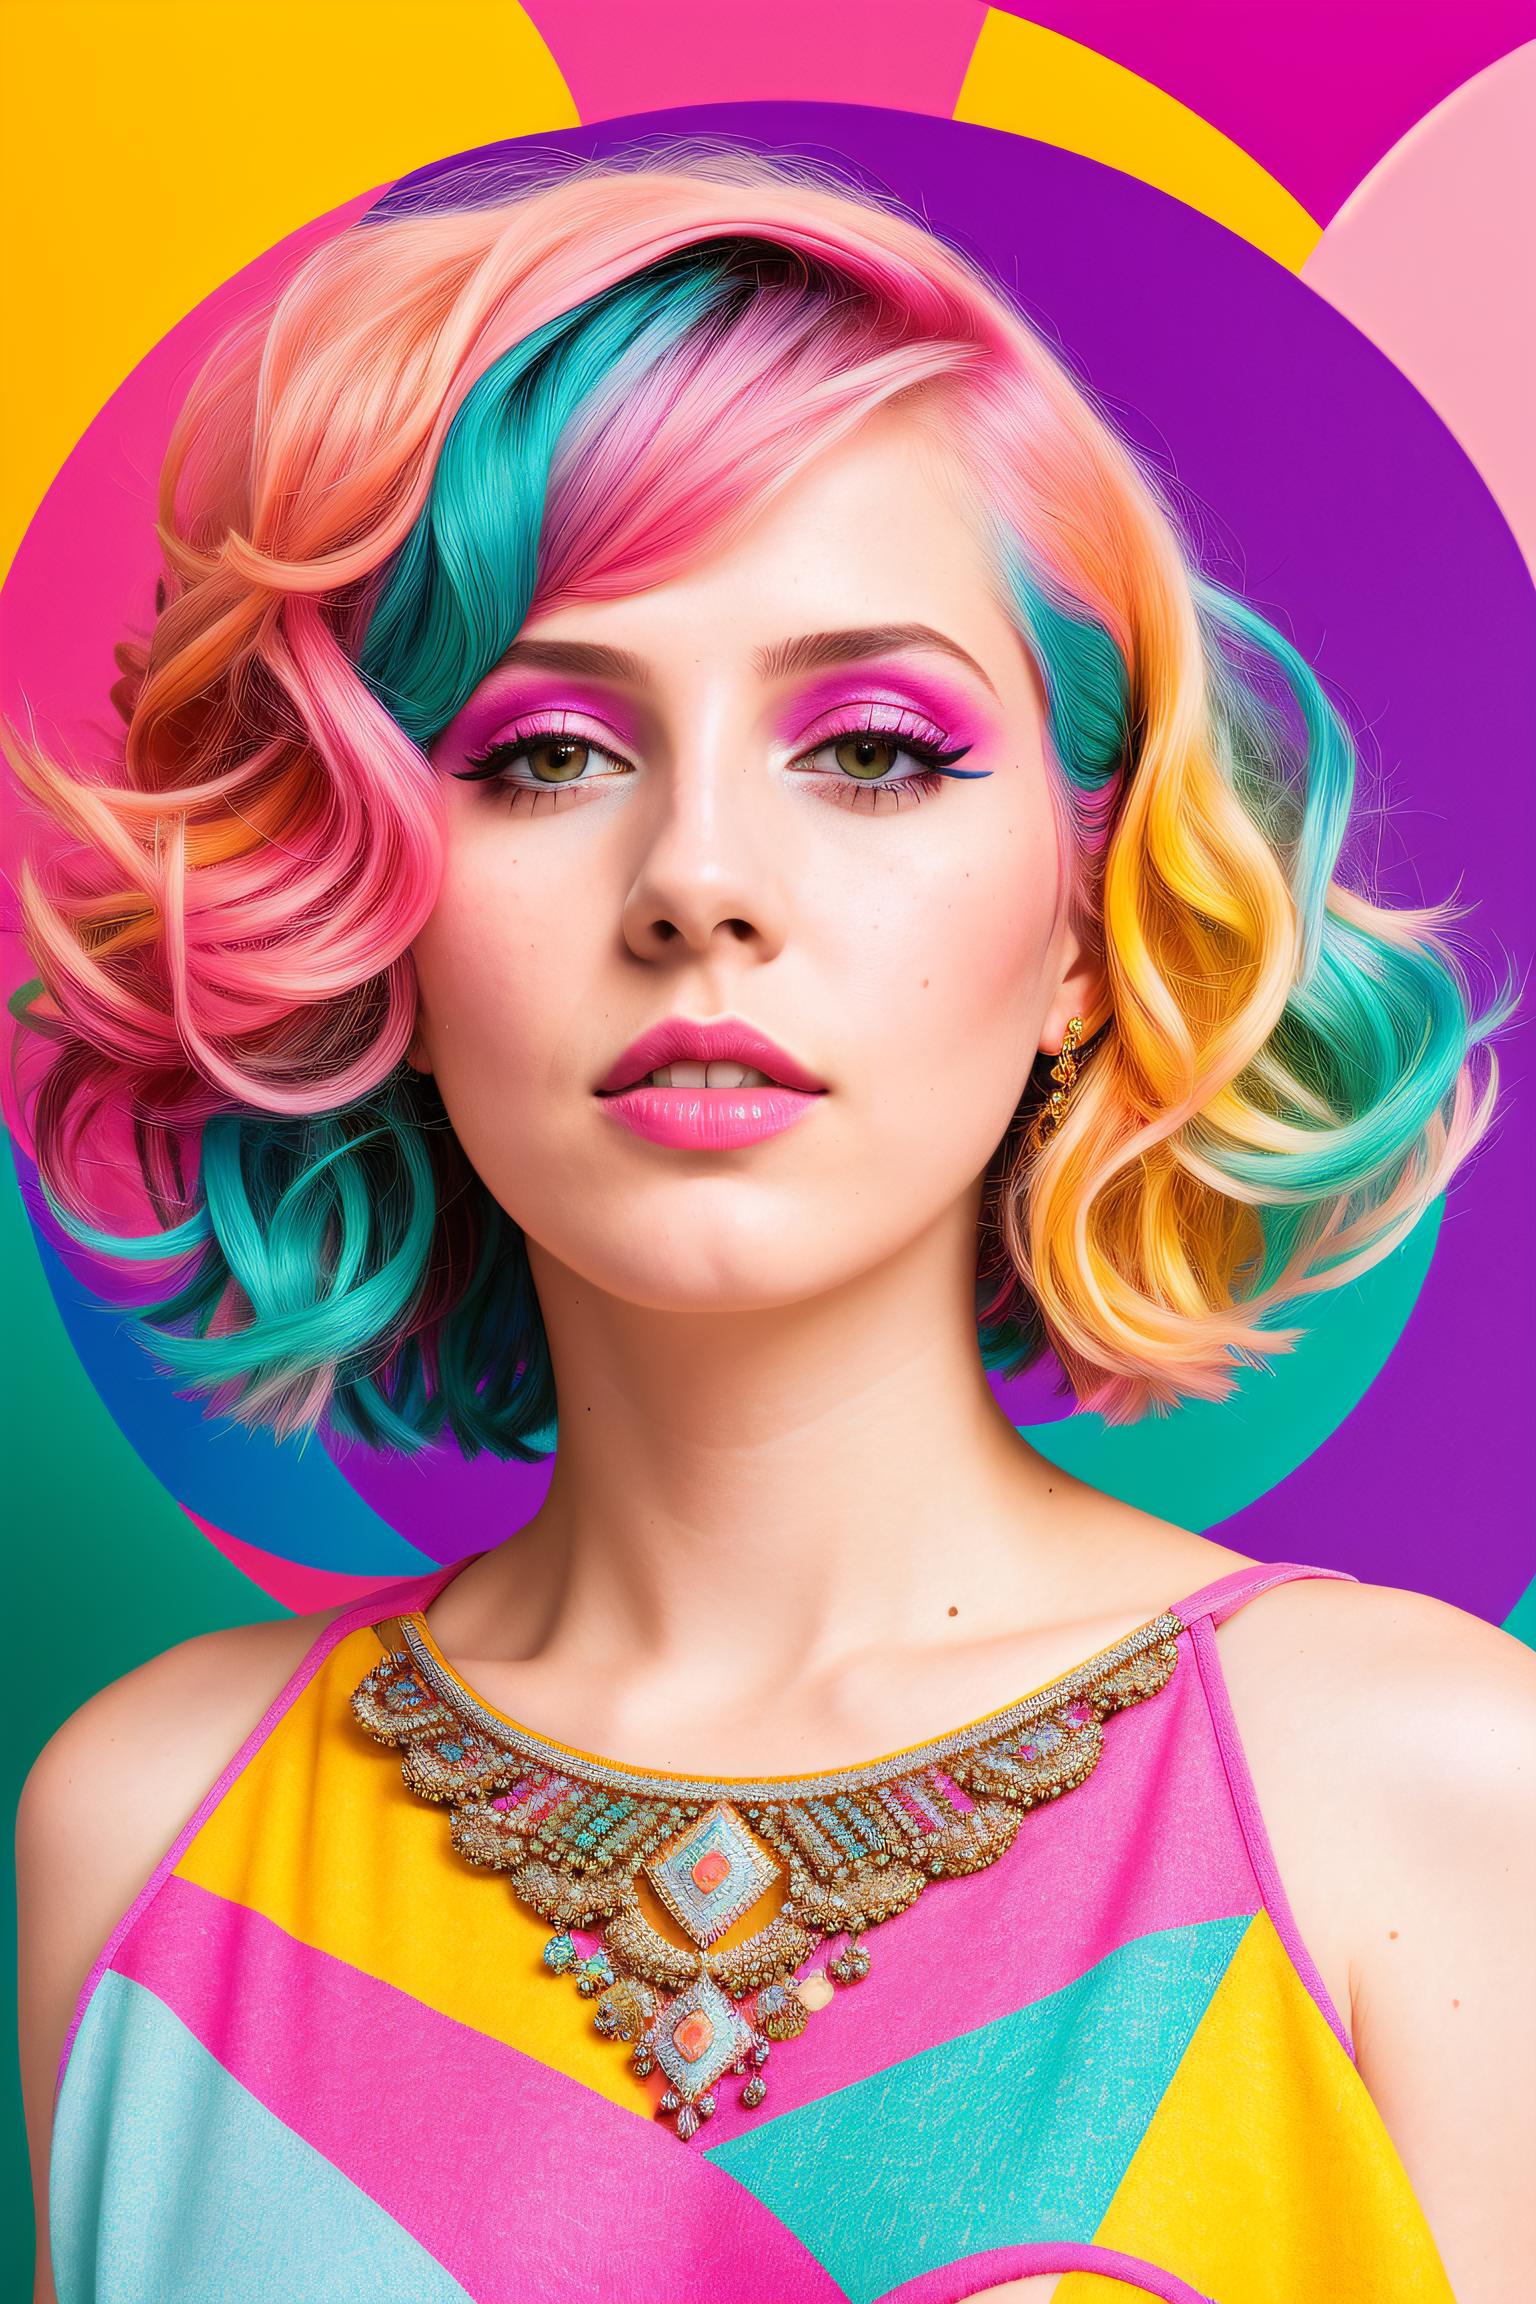 Colorful Female Model with Rainbow Hair and Makeup.